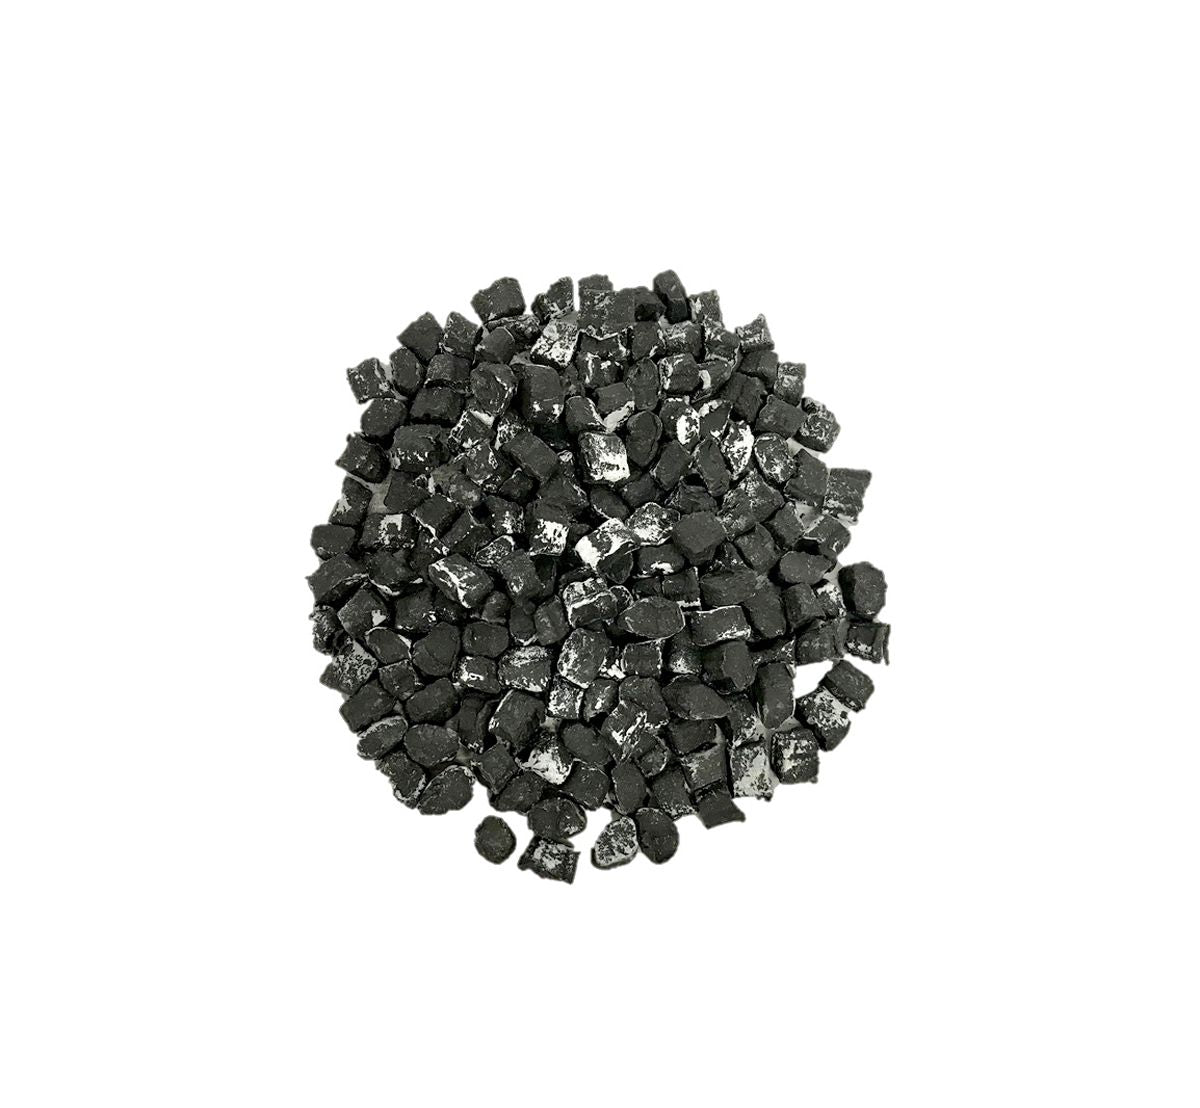 Enhance A Fire 1.25 Lb. Forge Premium Decorative Embers for Indoor Vented Gas Logs and Fireplace